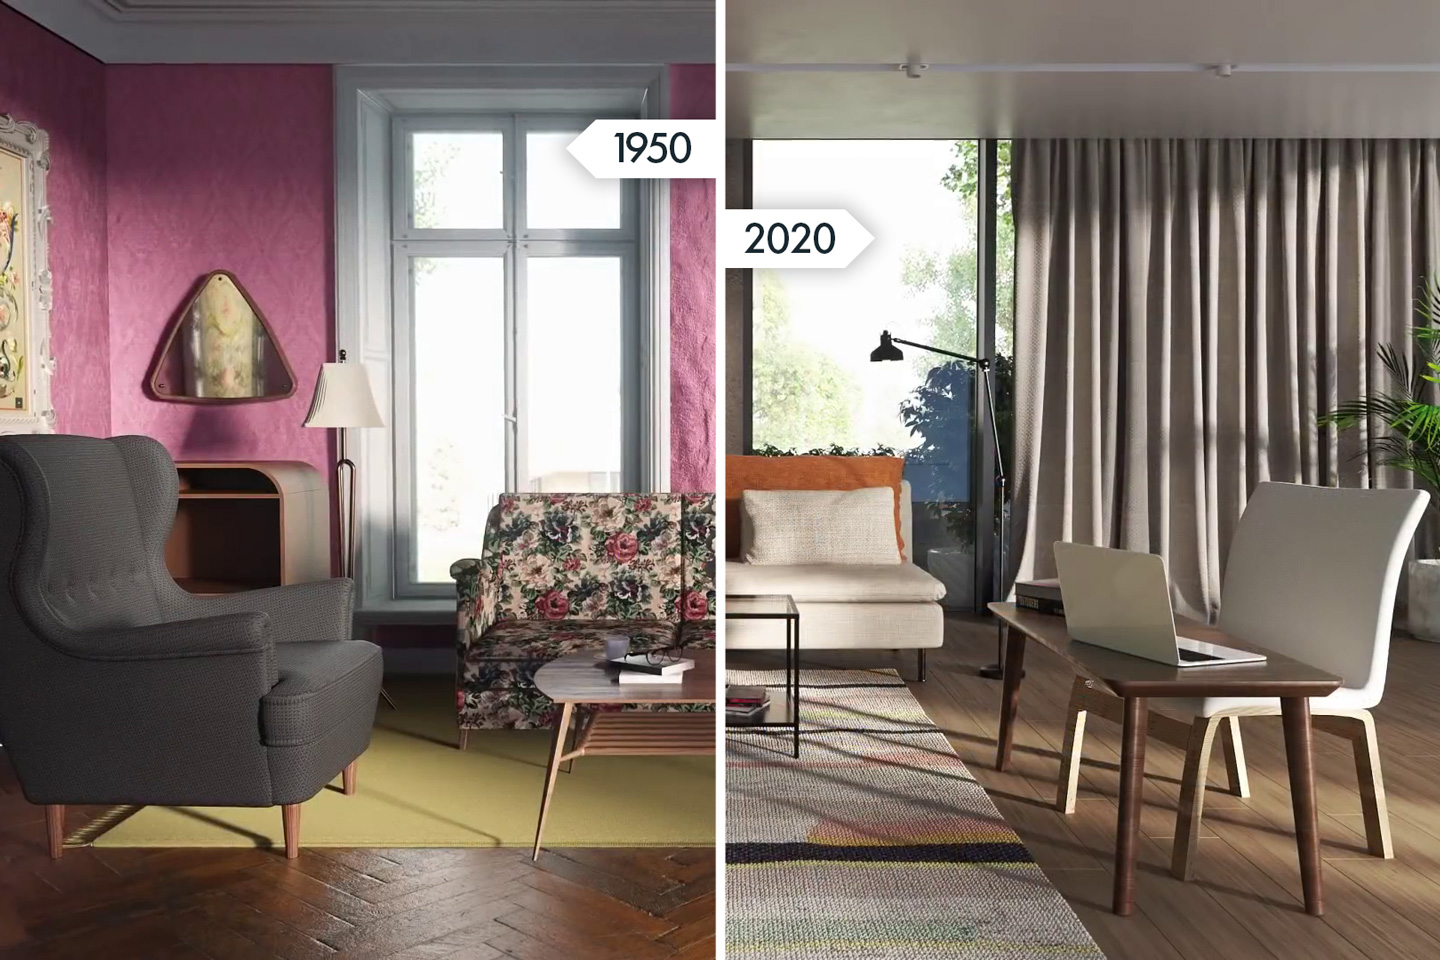 IKEA’s 70-year design evolution compiled into this one video shows why they’re the greatest furniture brand of all time